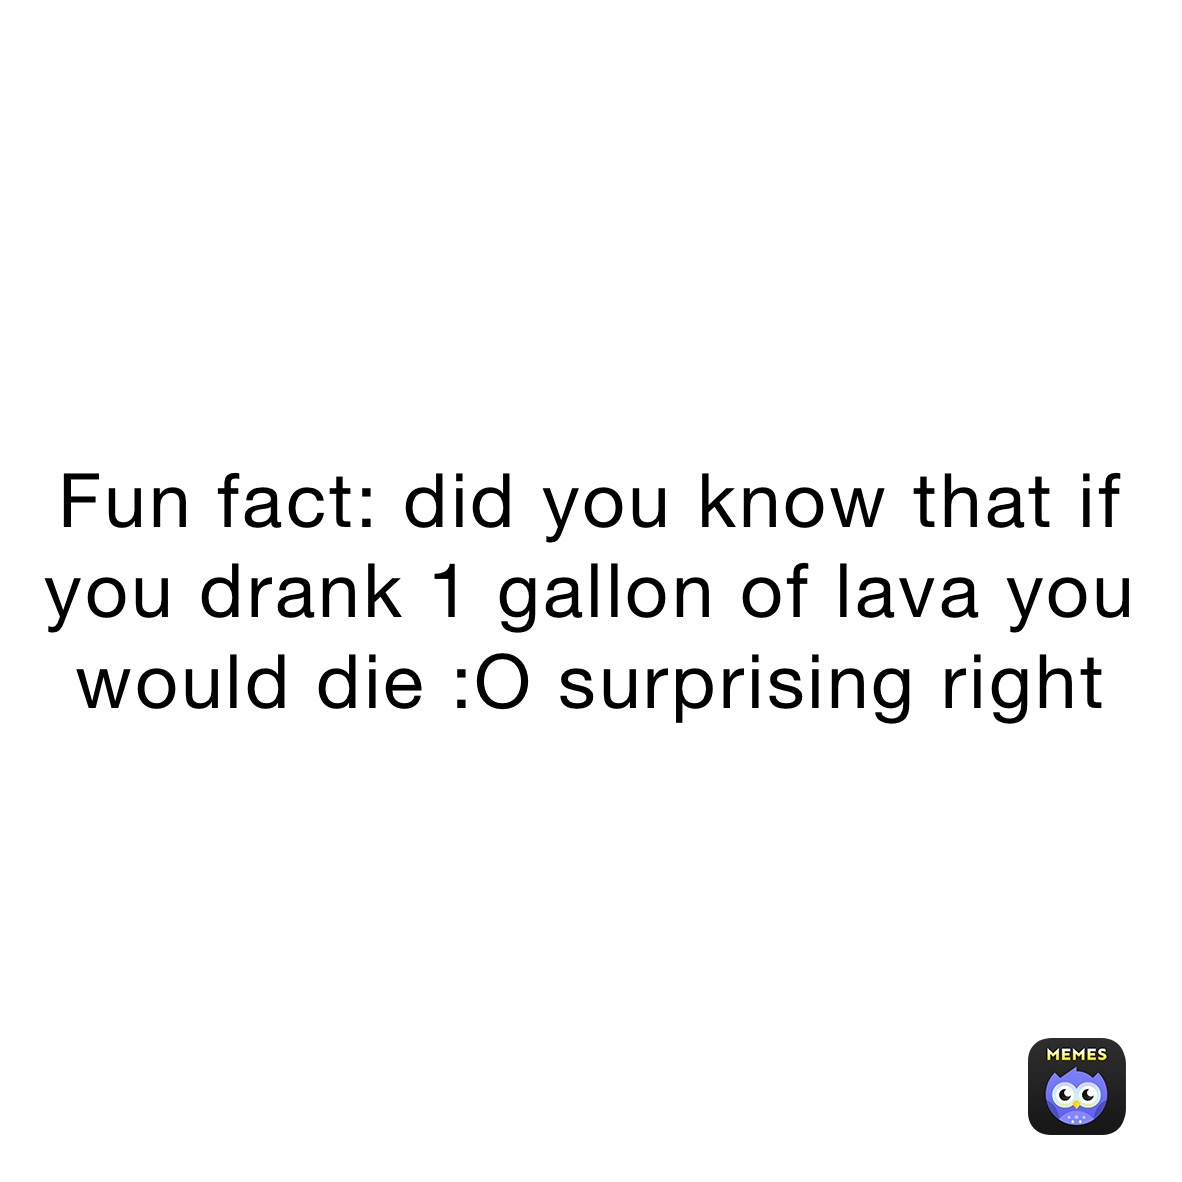 Fun fact: did you know that if you drank 1 gallon of lava you would die :O surprising right